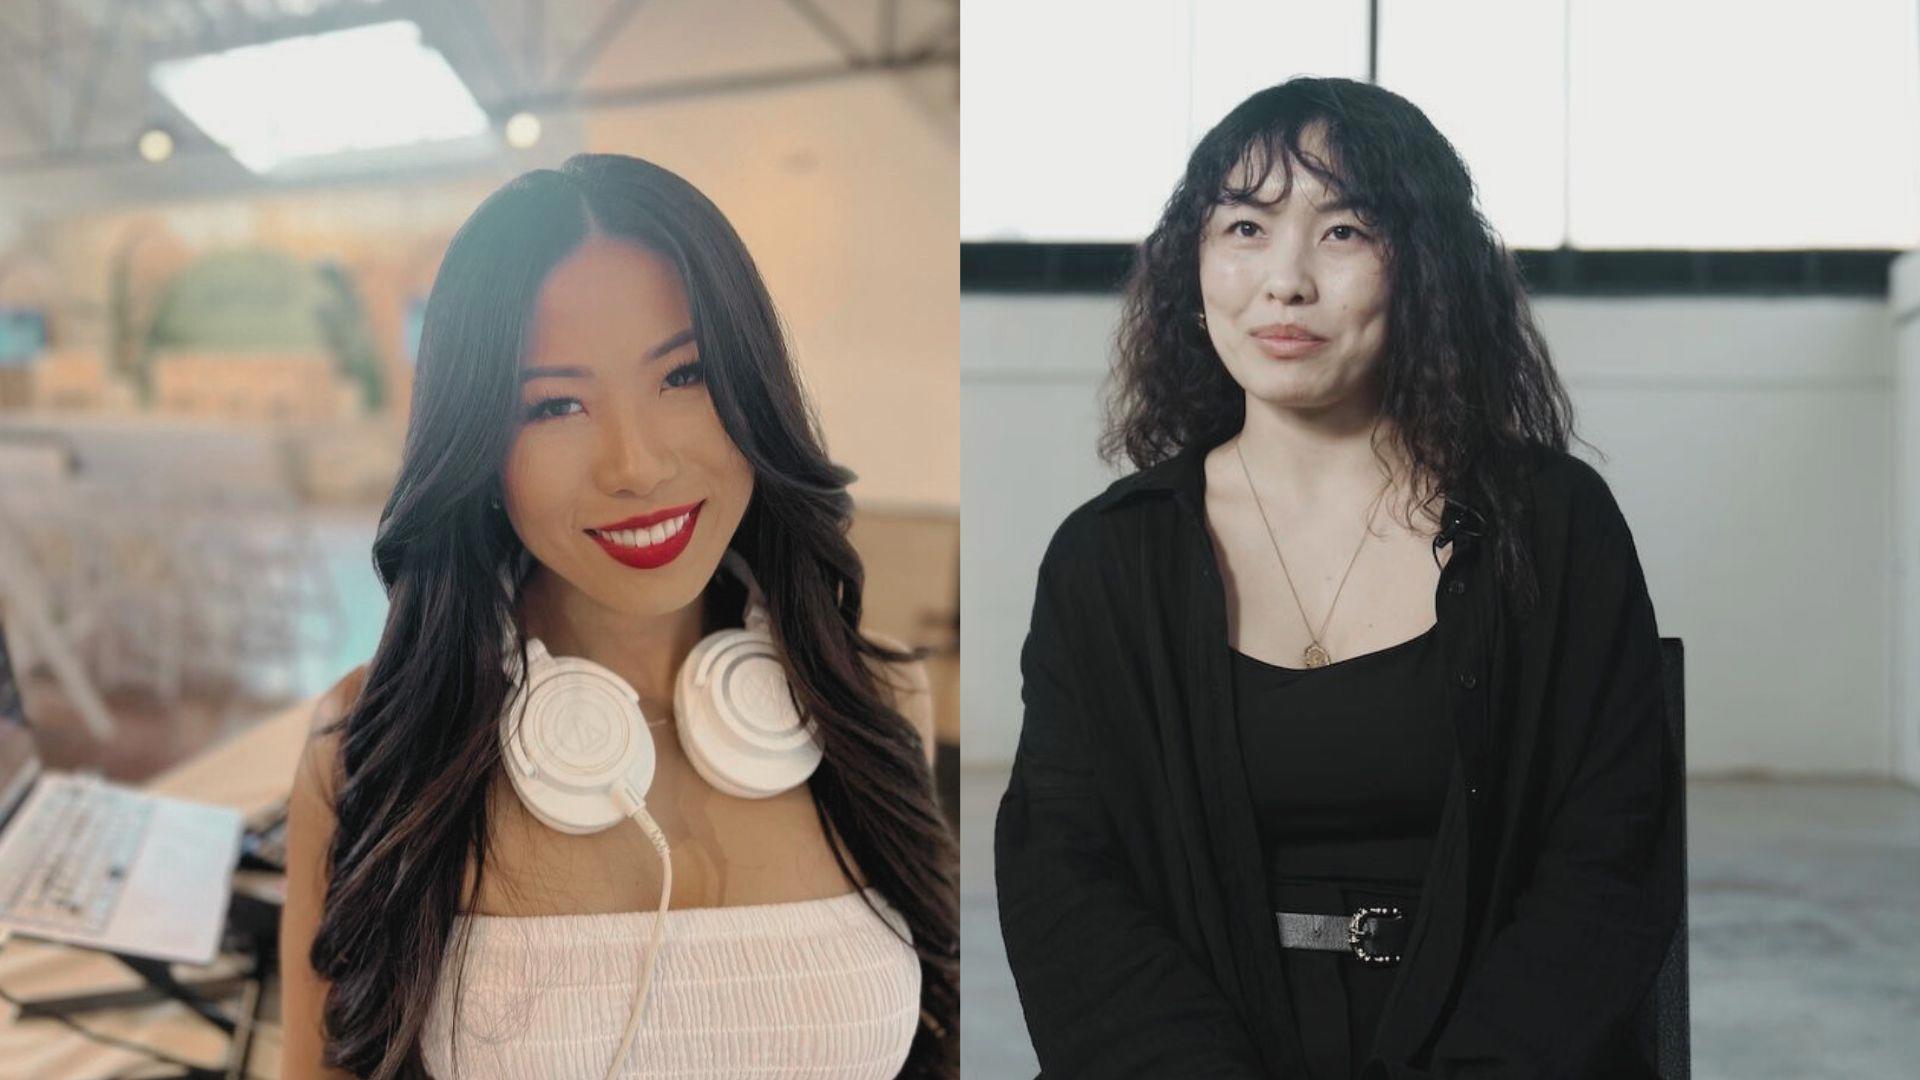 Page Yang is an accomplished dancer and choreographer. Chika Takai is the Atlanta Hawks DJ and performs in the city. The duo adds flavor to Atlanta's art scene.